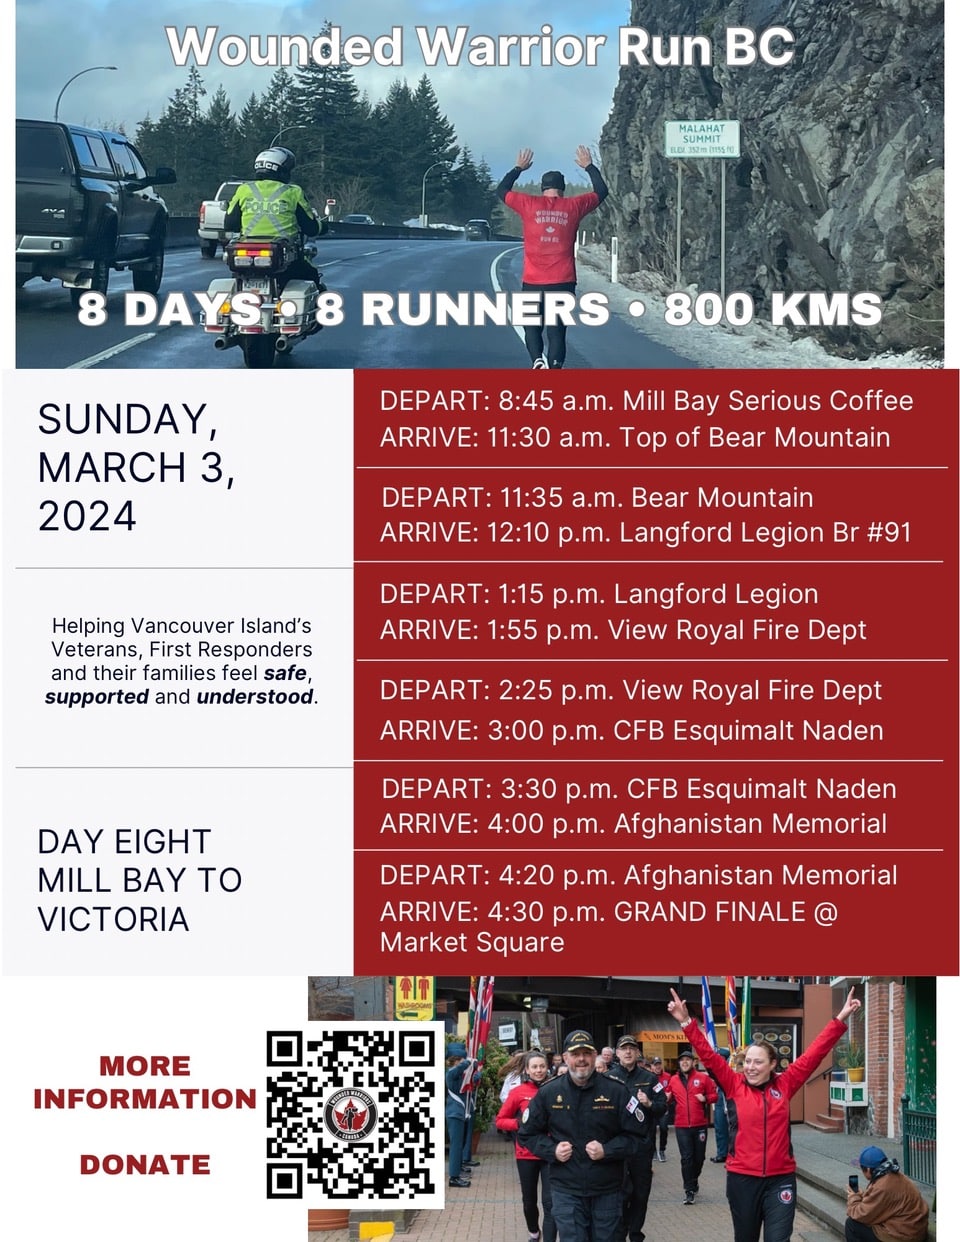 Wounded Warriors Run BC - Sunday March 3, 2024 Day 8 Mill Bay to Victoria